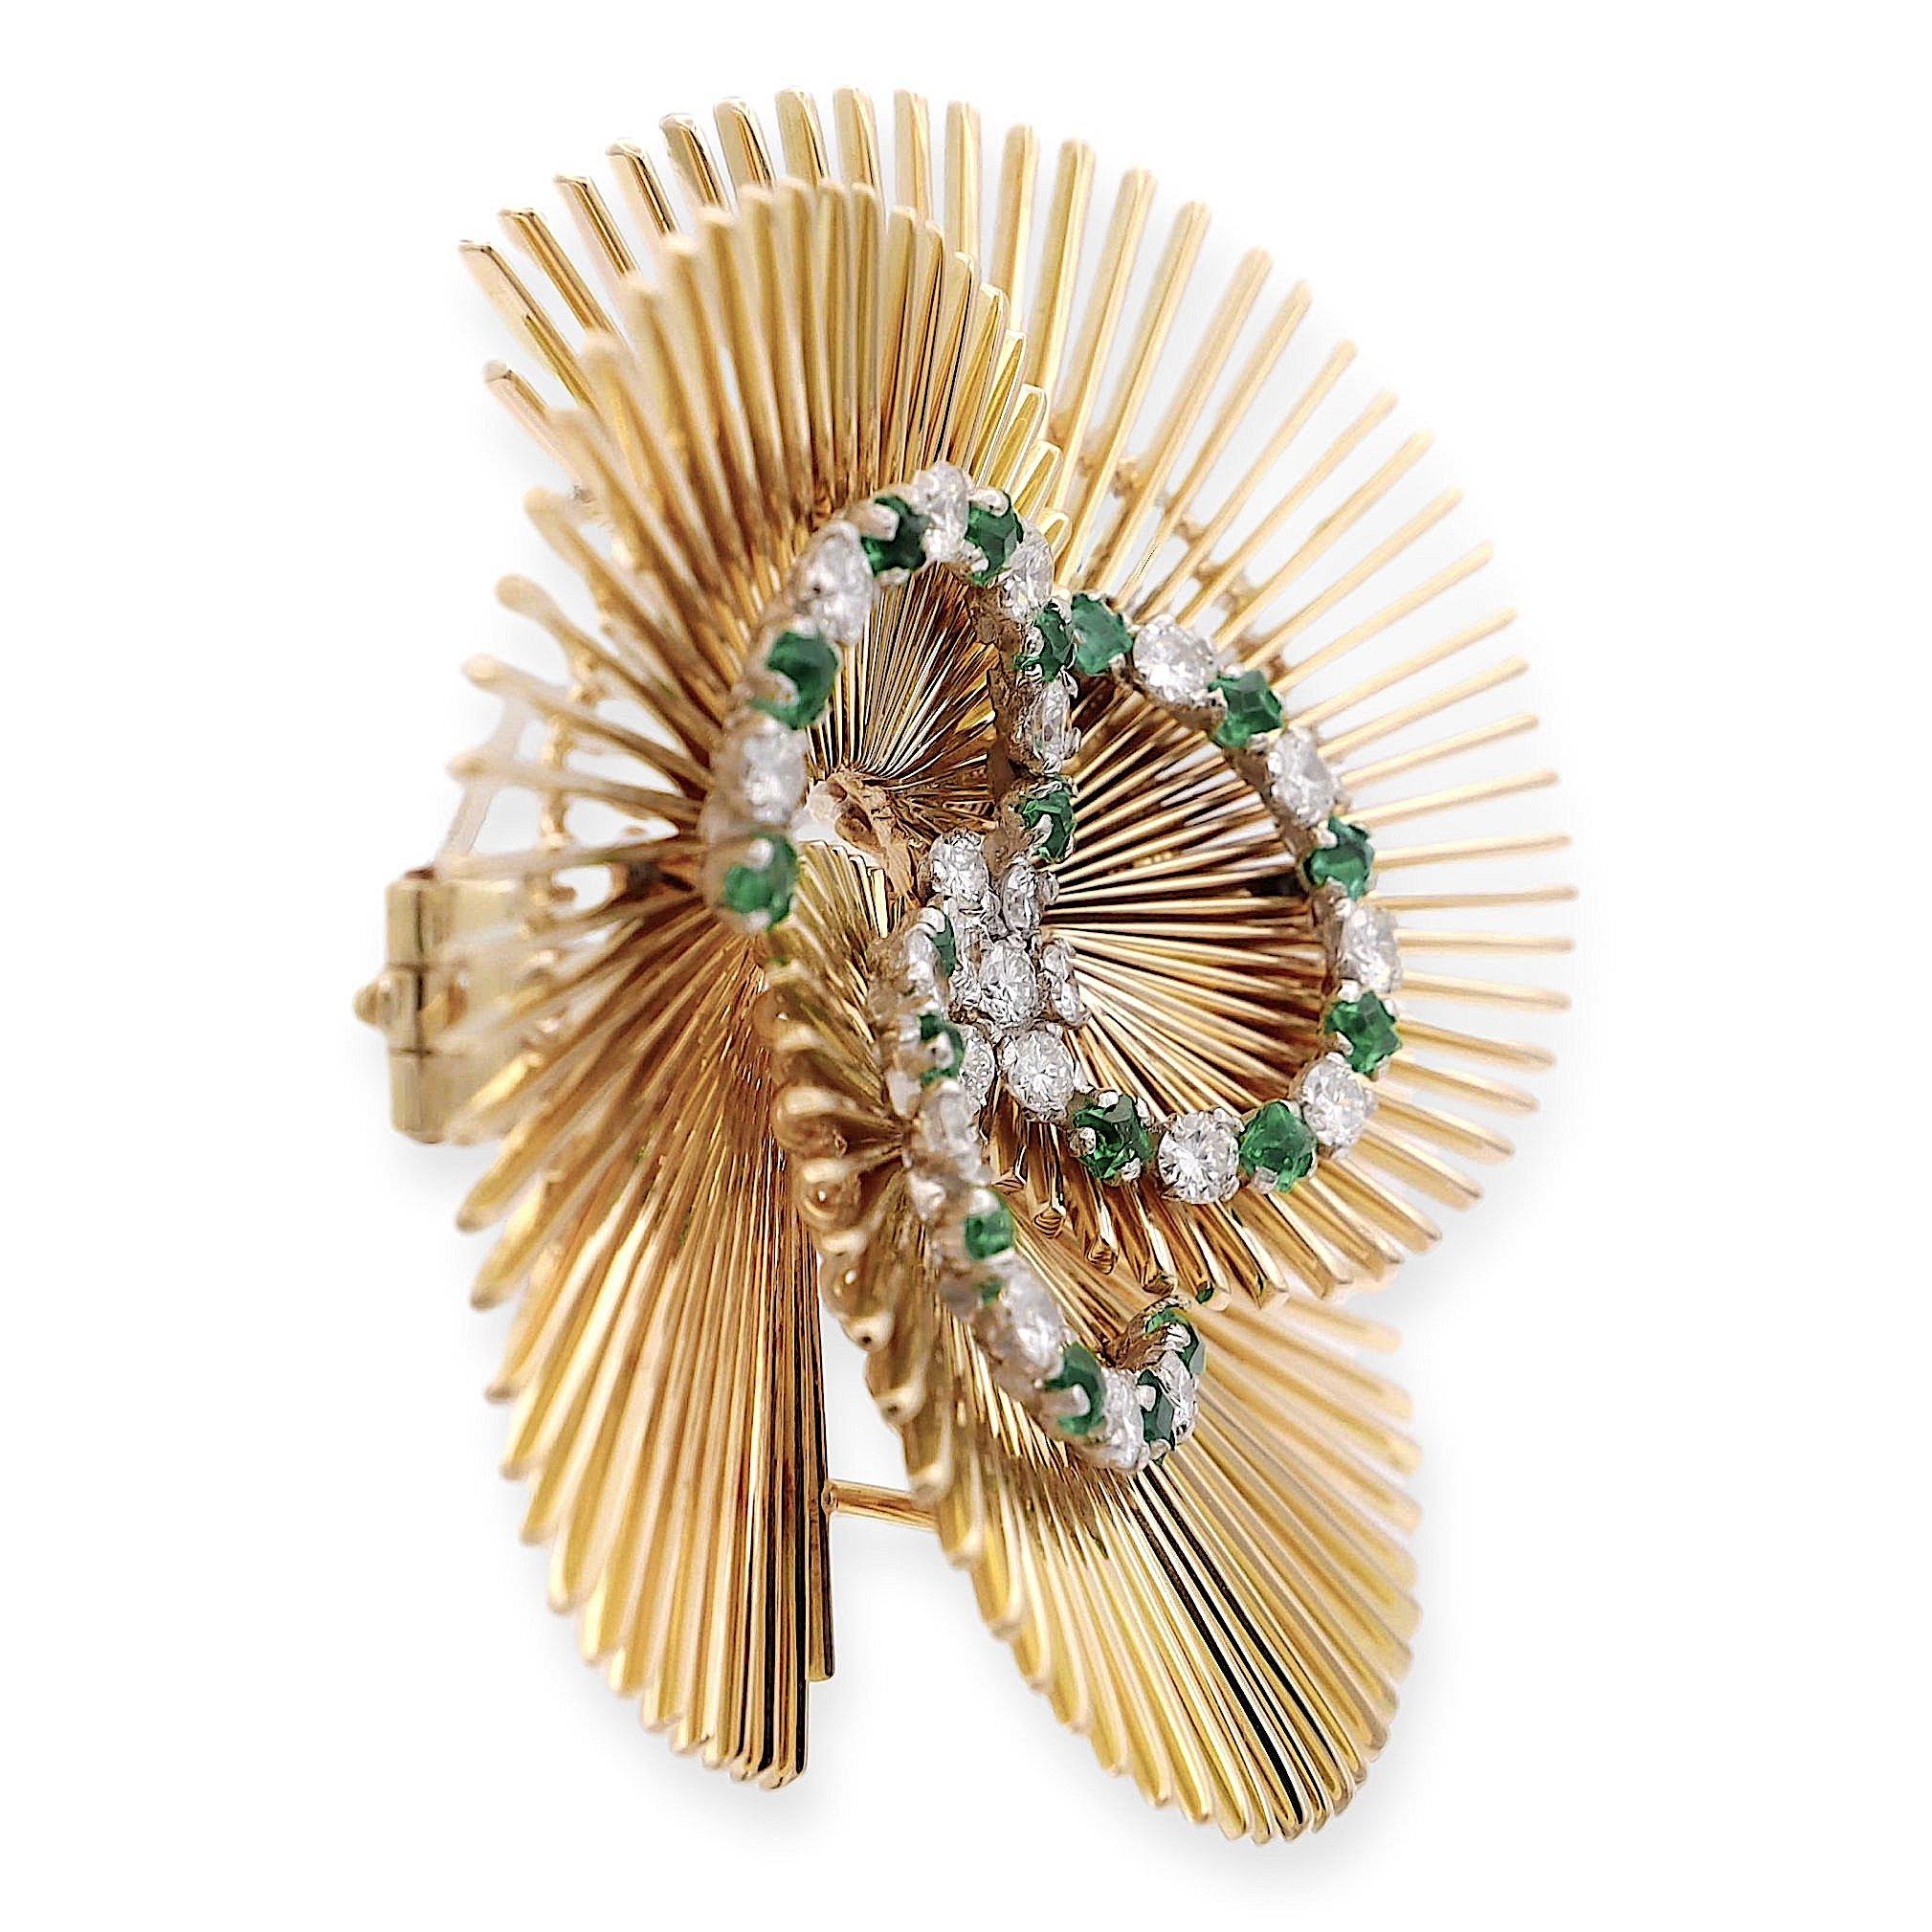 Vintage Brooch finely crafted in 14 karat yellow gold with a cluster of diamonds in the center complemented by a swirl design with interlocking round brilliant cut diamonds weighing 1 carat total weight ranging in G-H color, VS clarity and square